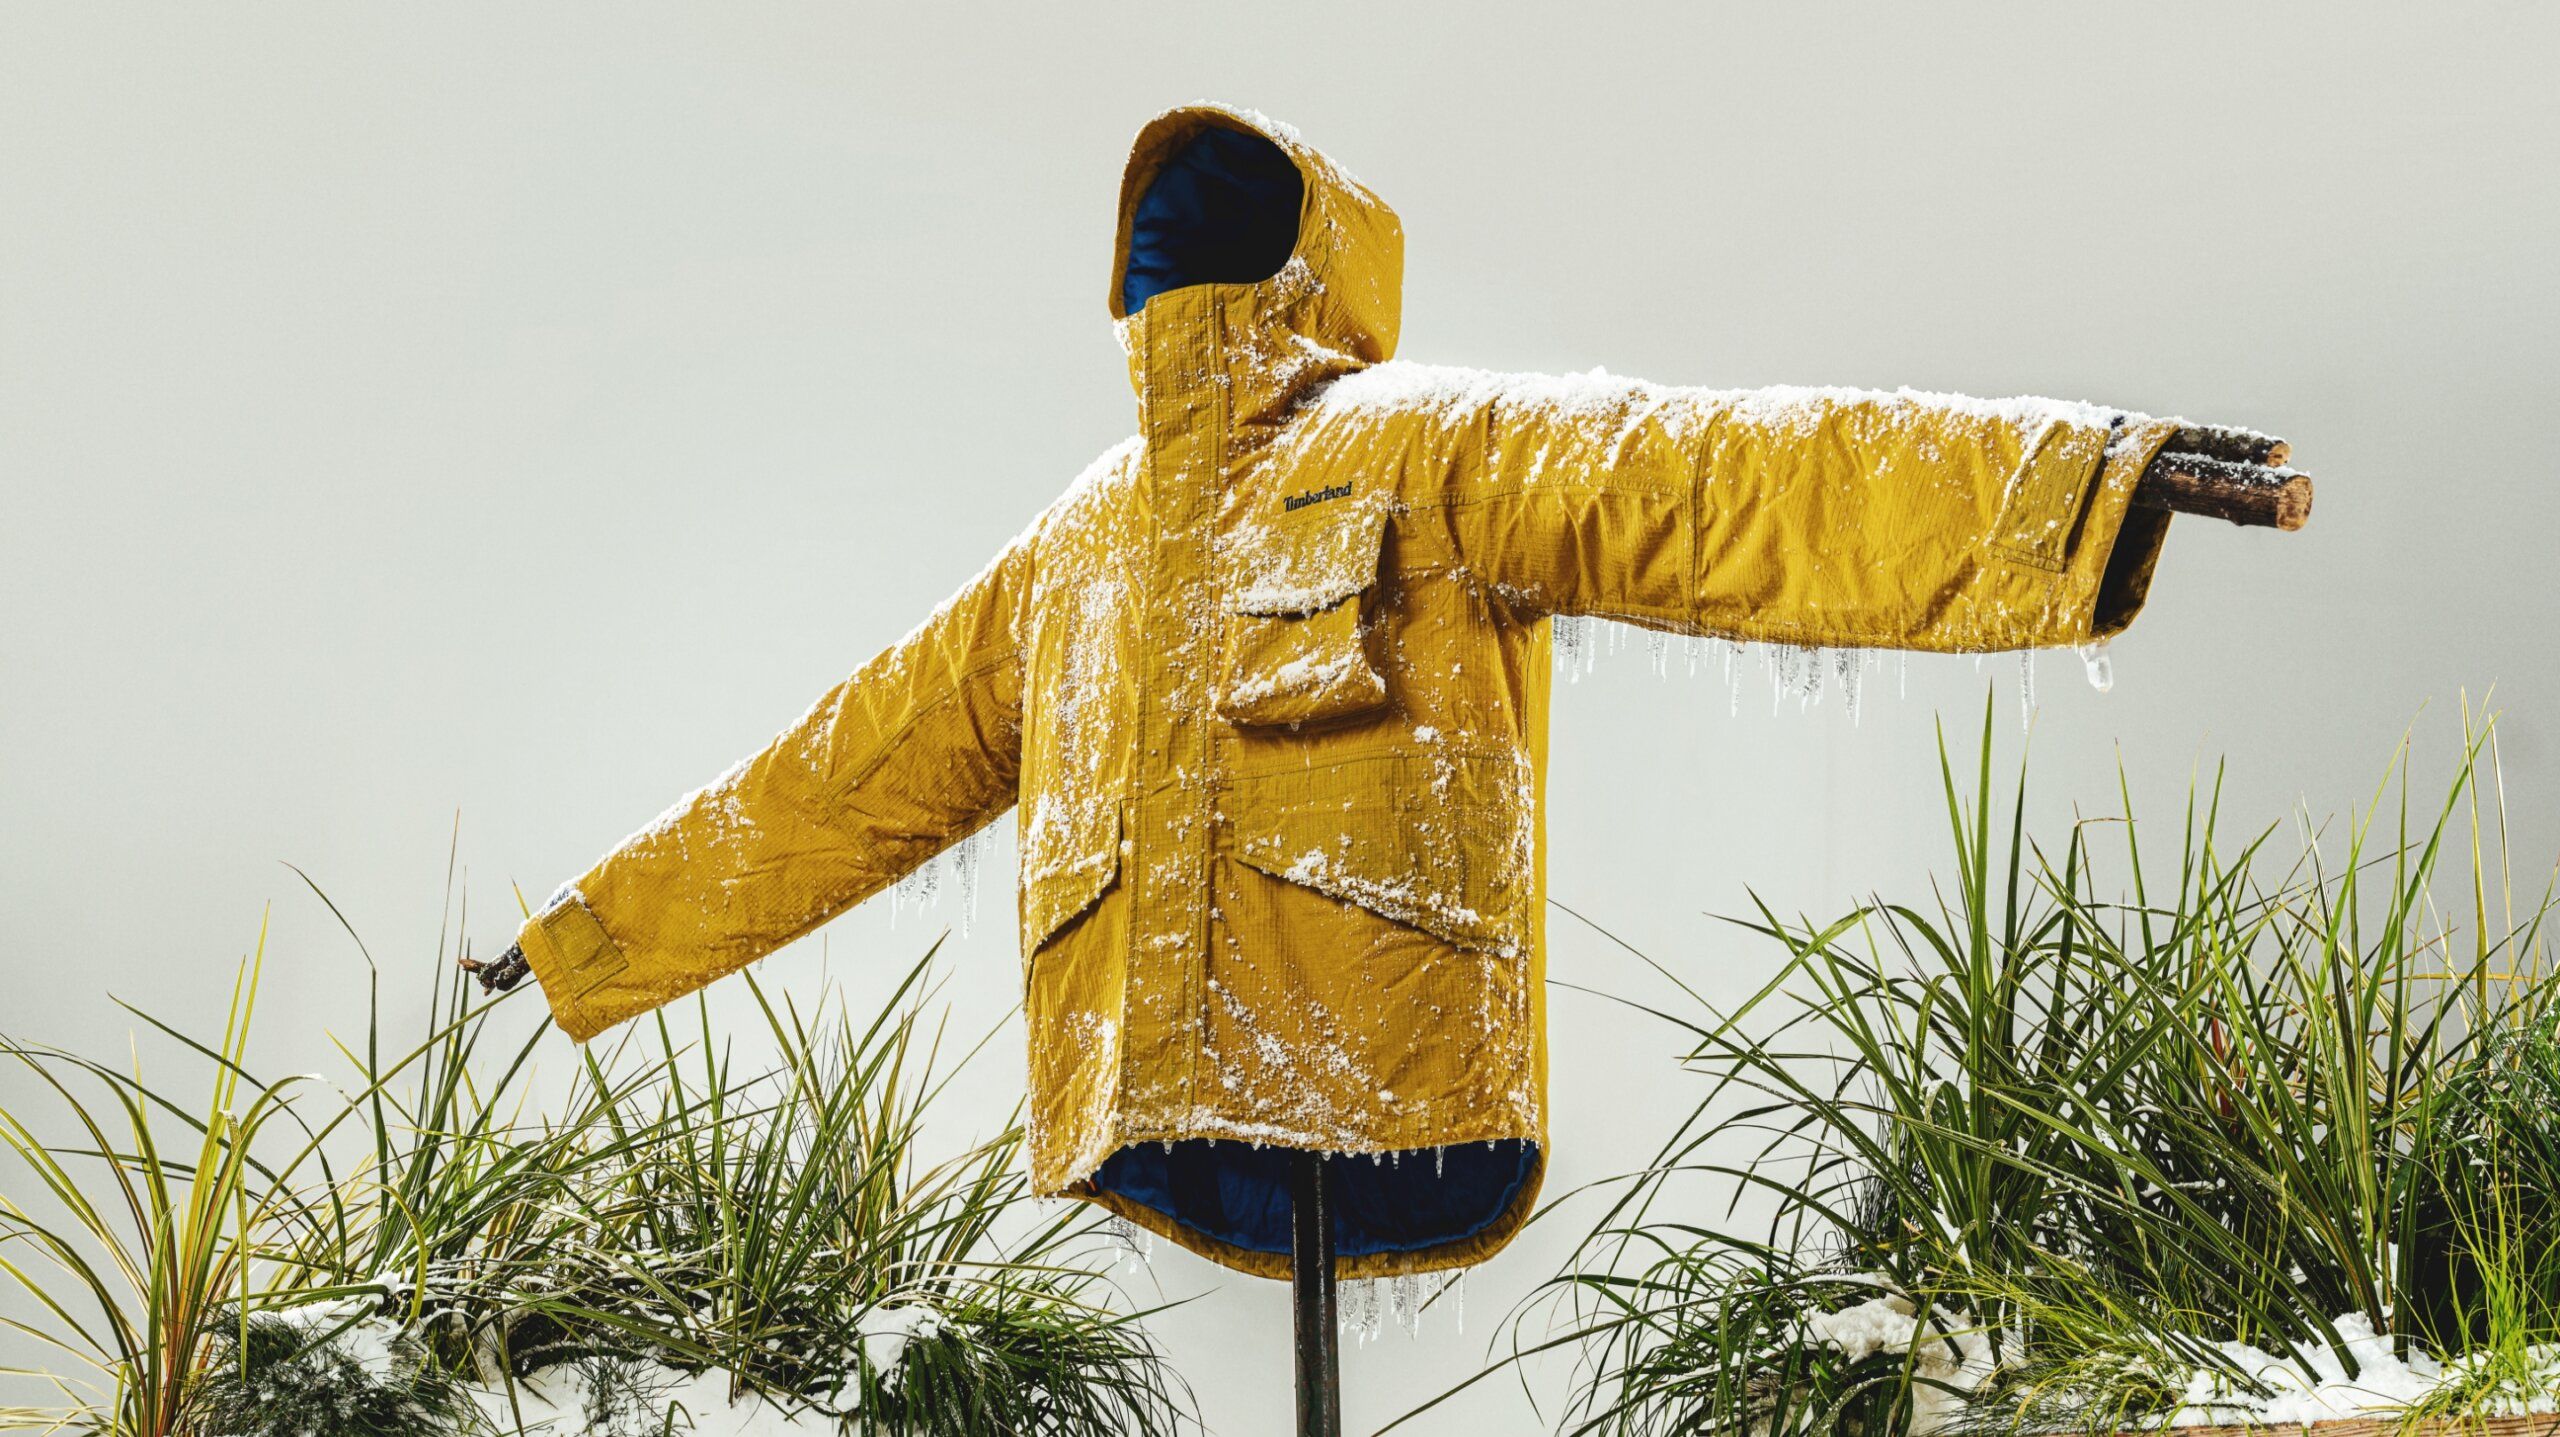 Timberland jacket with snow and icicles. Jacket is propped up with sticks like a scarecrow